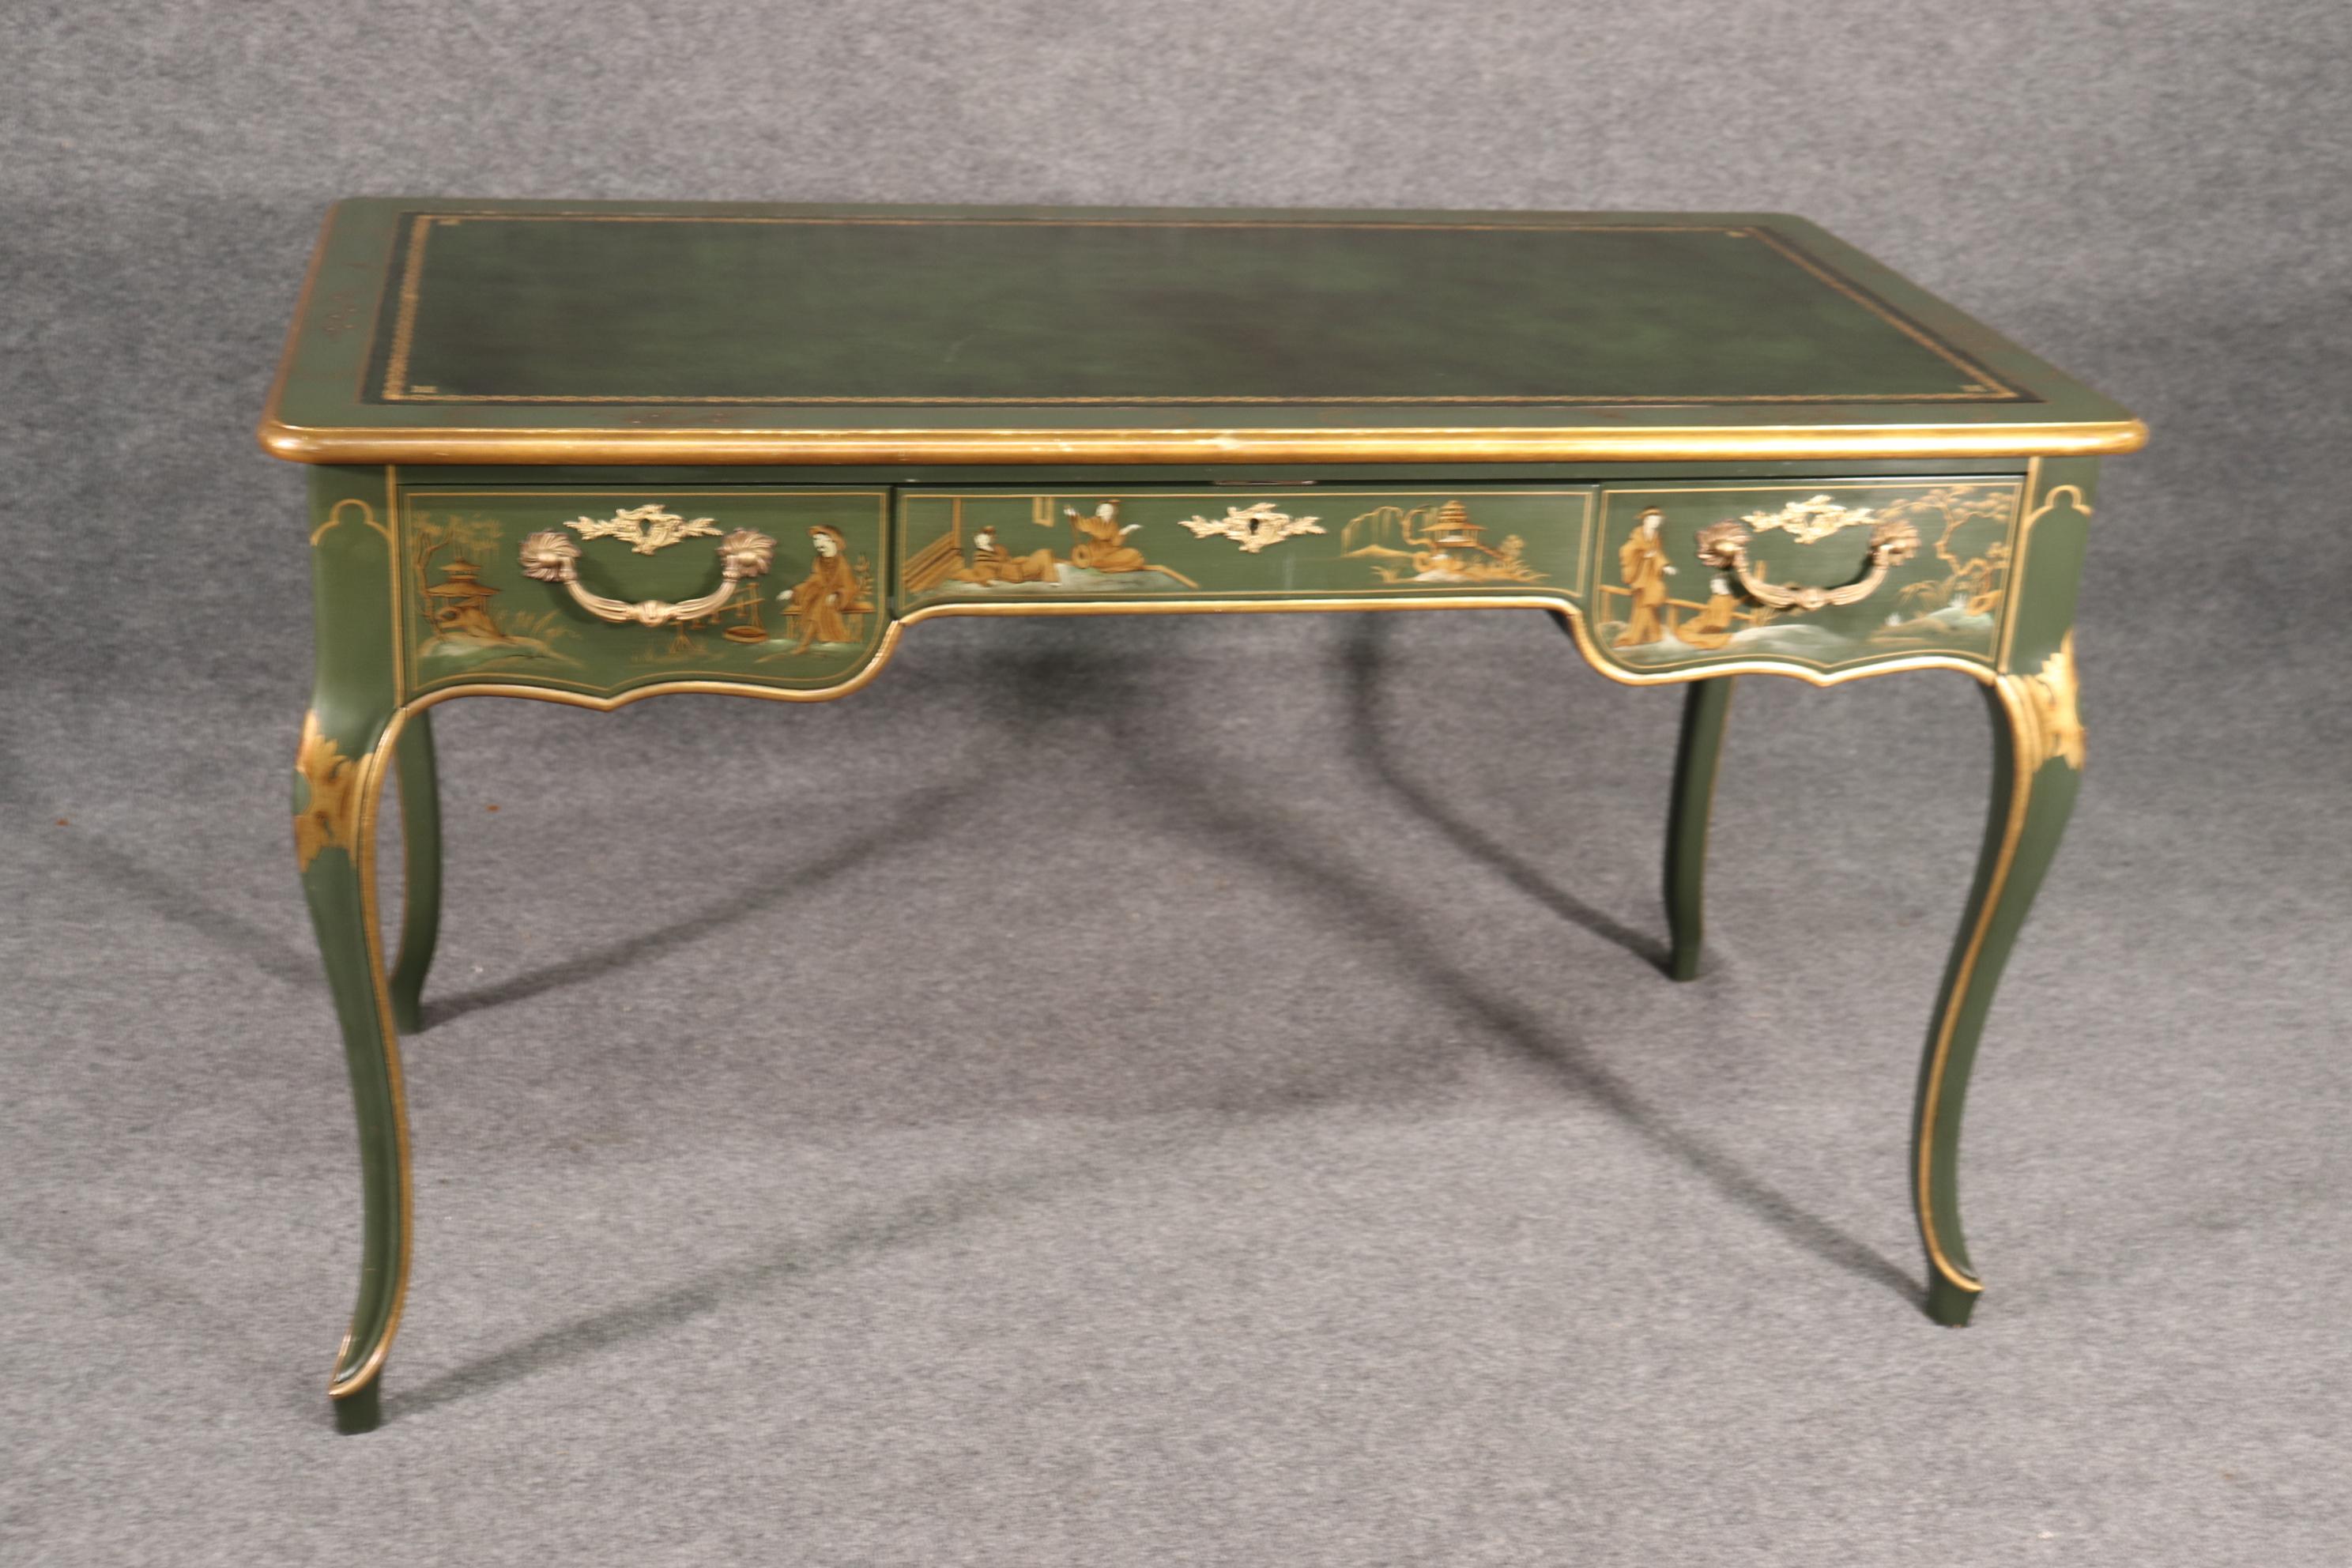 This is a rare color combination of gree on green. The top is a beautiful dark green and the rest of the desk is a soft sagey green. The desk is from the 1960s era and is in good condition with minor signs of age and use. This is a classic desk and